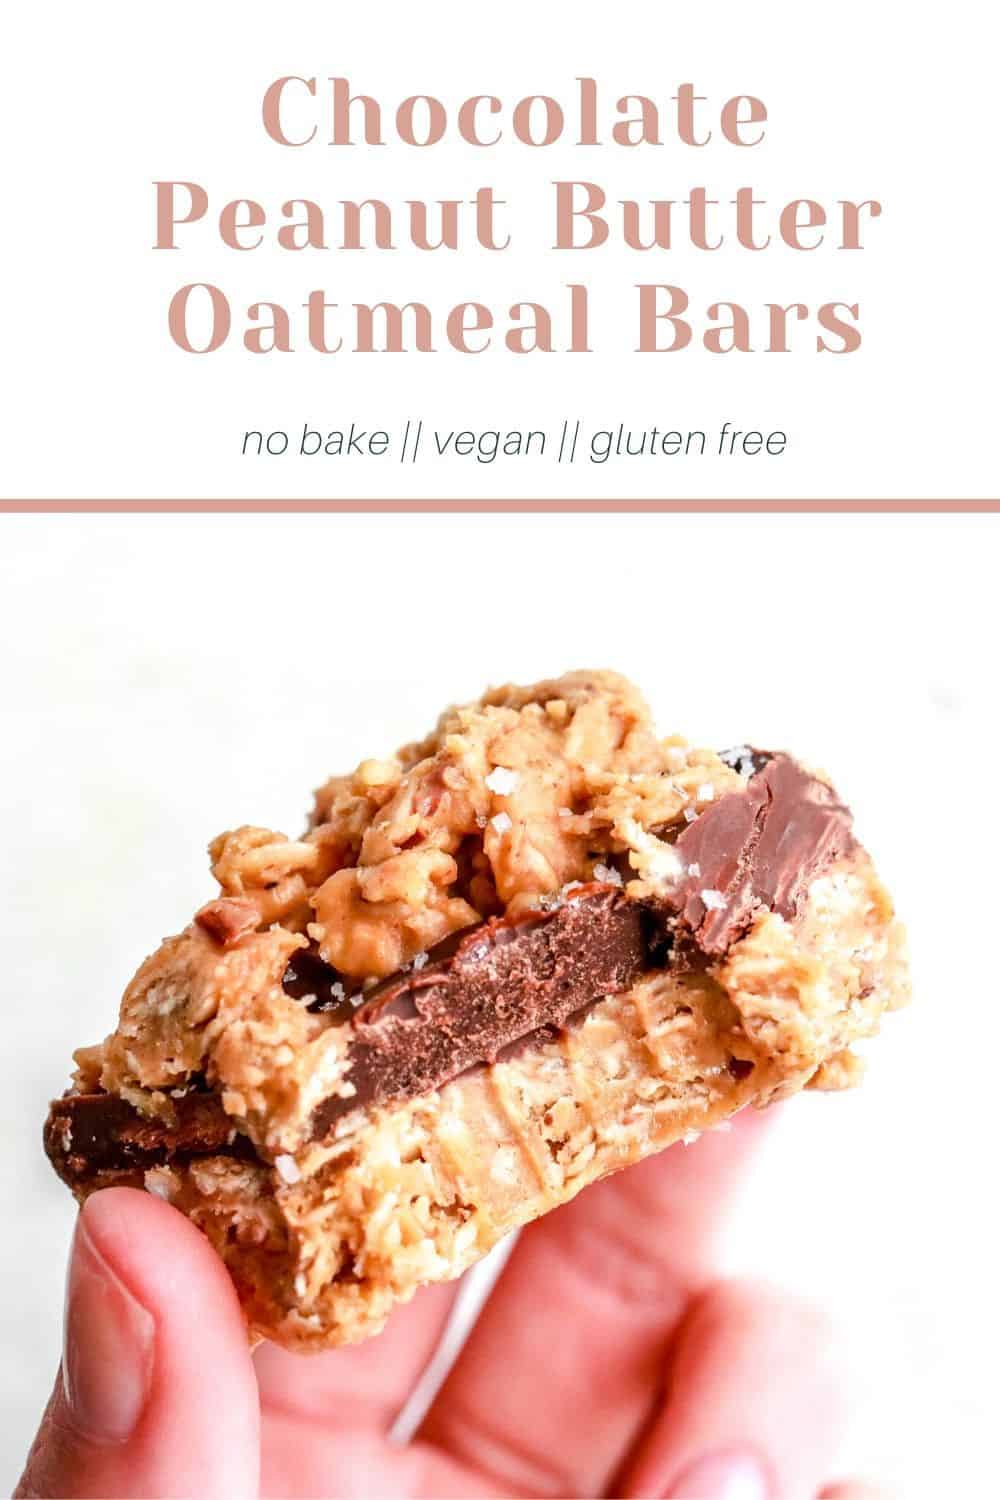 hand holding a chocolate peanut butter oatmeal bar on white background pinterest image